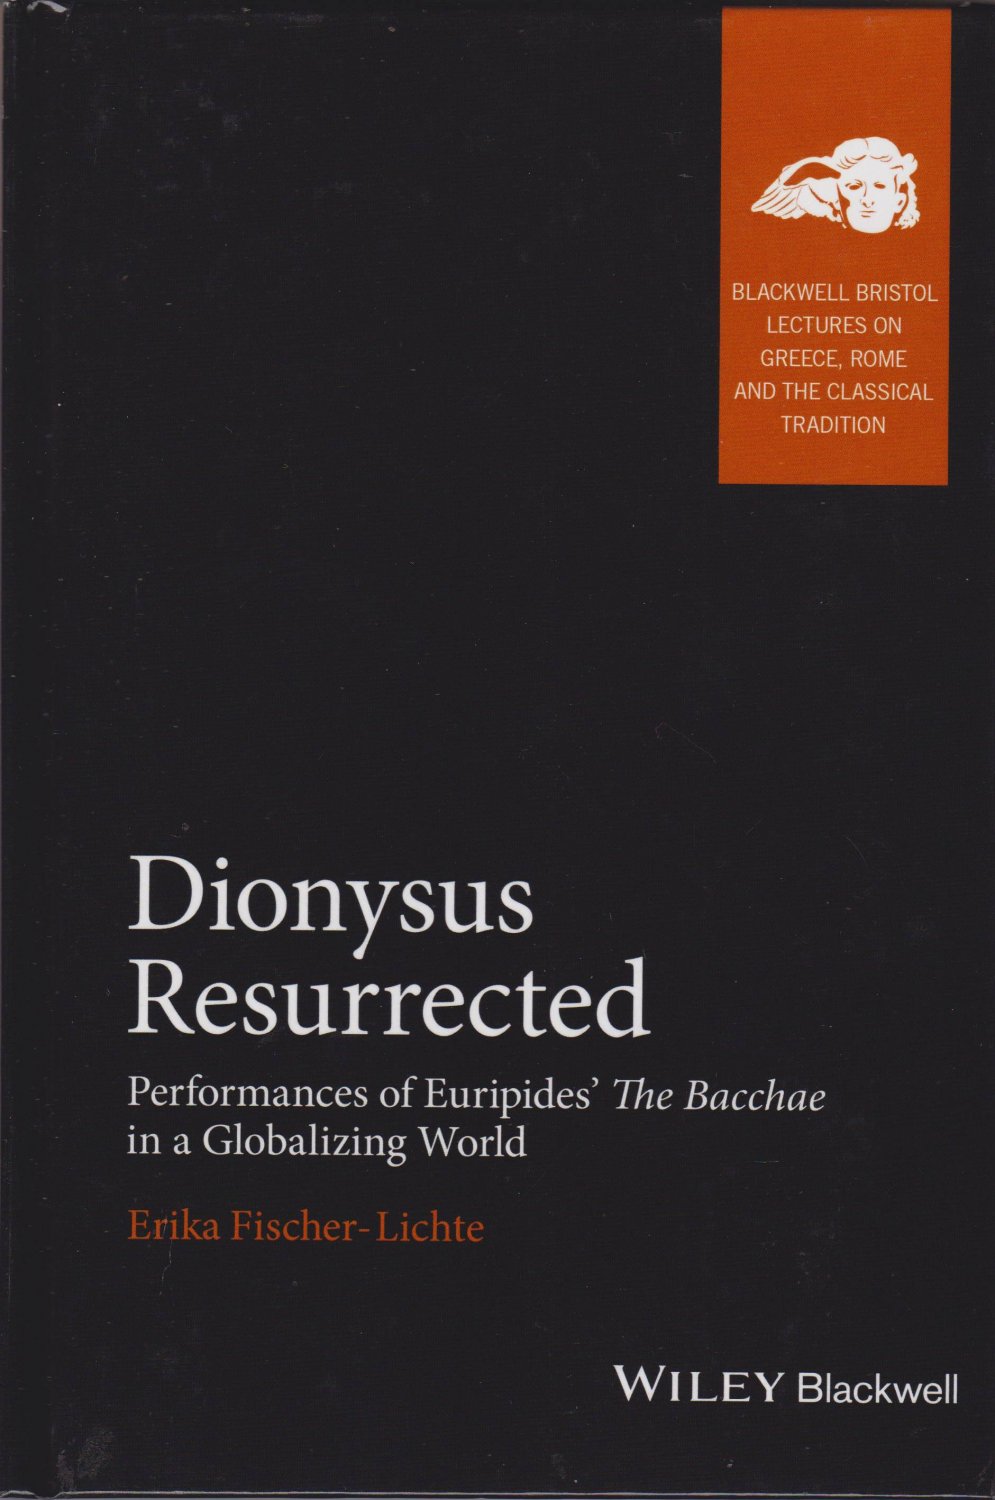 FISCHER-LICHTE, Erika:  Dionysus Resurrected. Performances of Euripides' "The Bacchae" in a Globalizing World. 